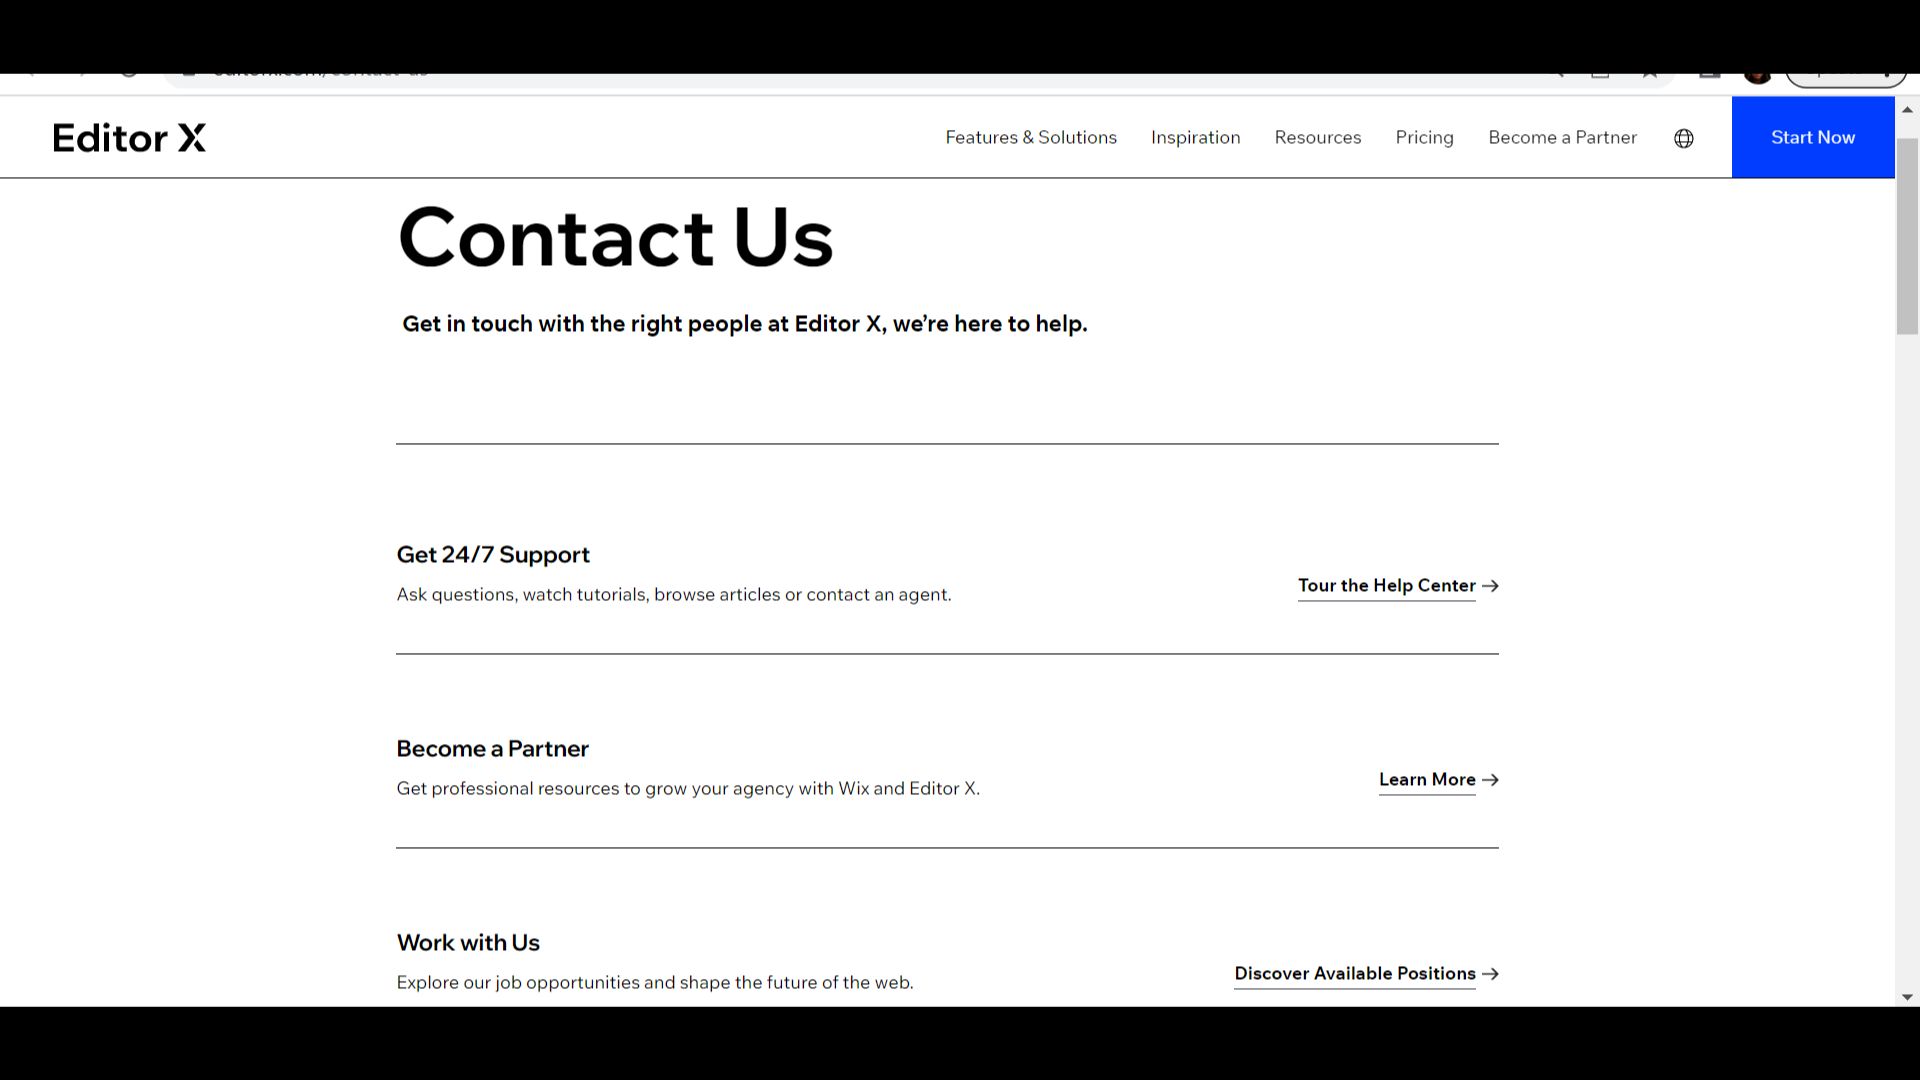 Editor X contact page